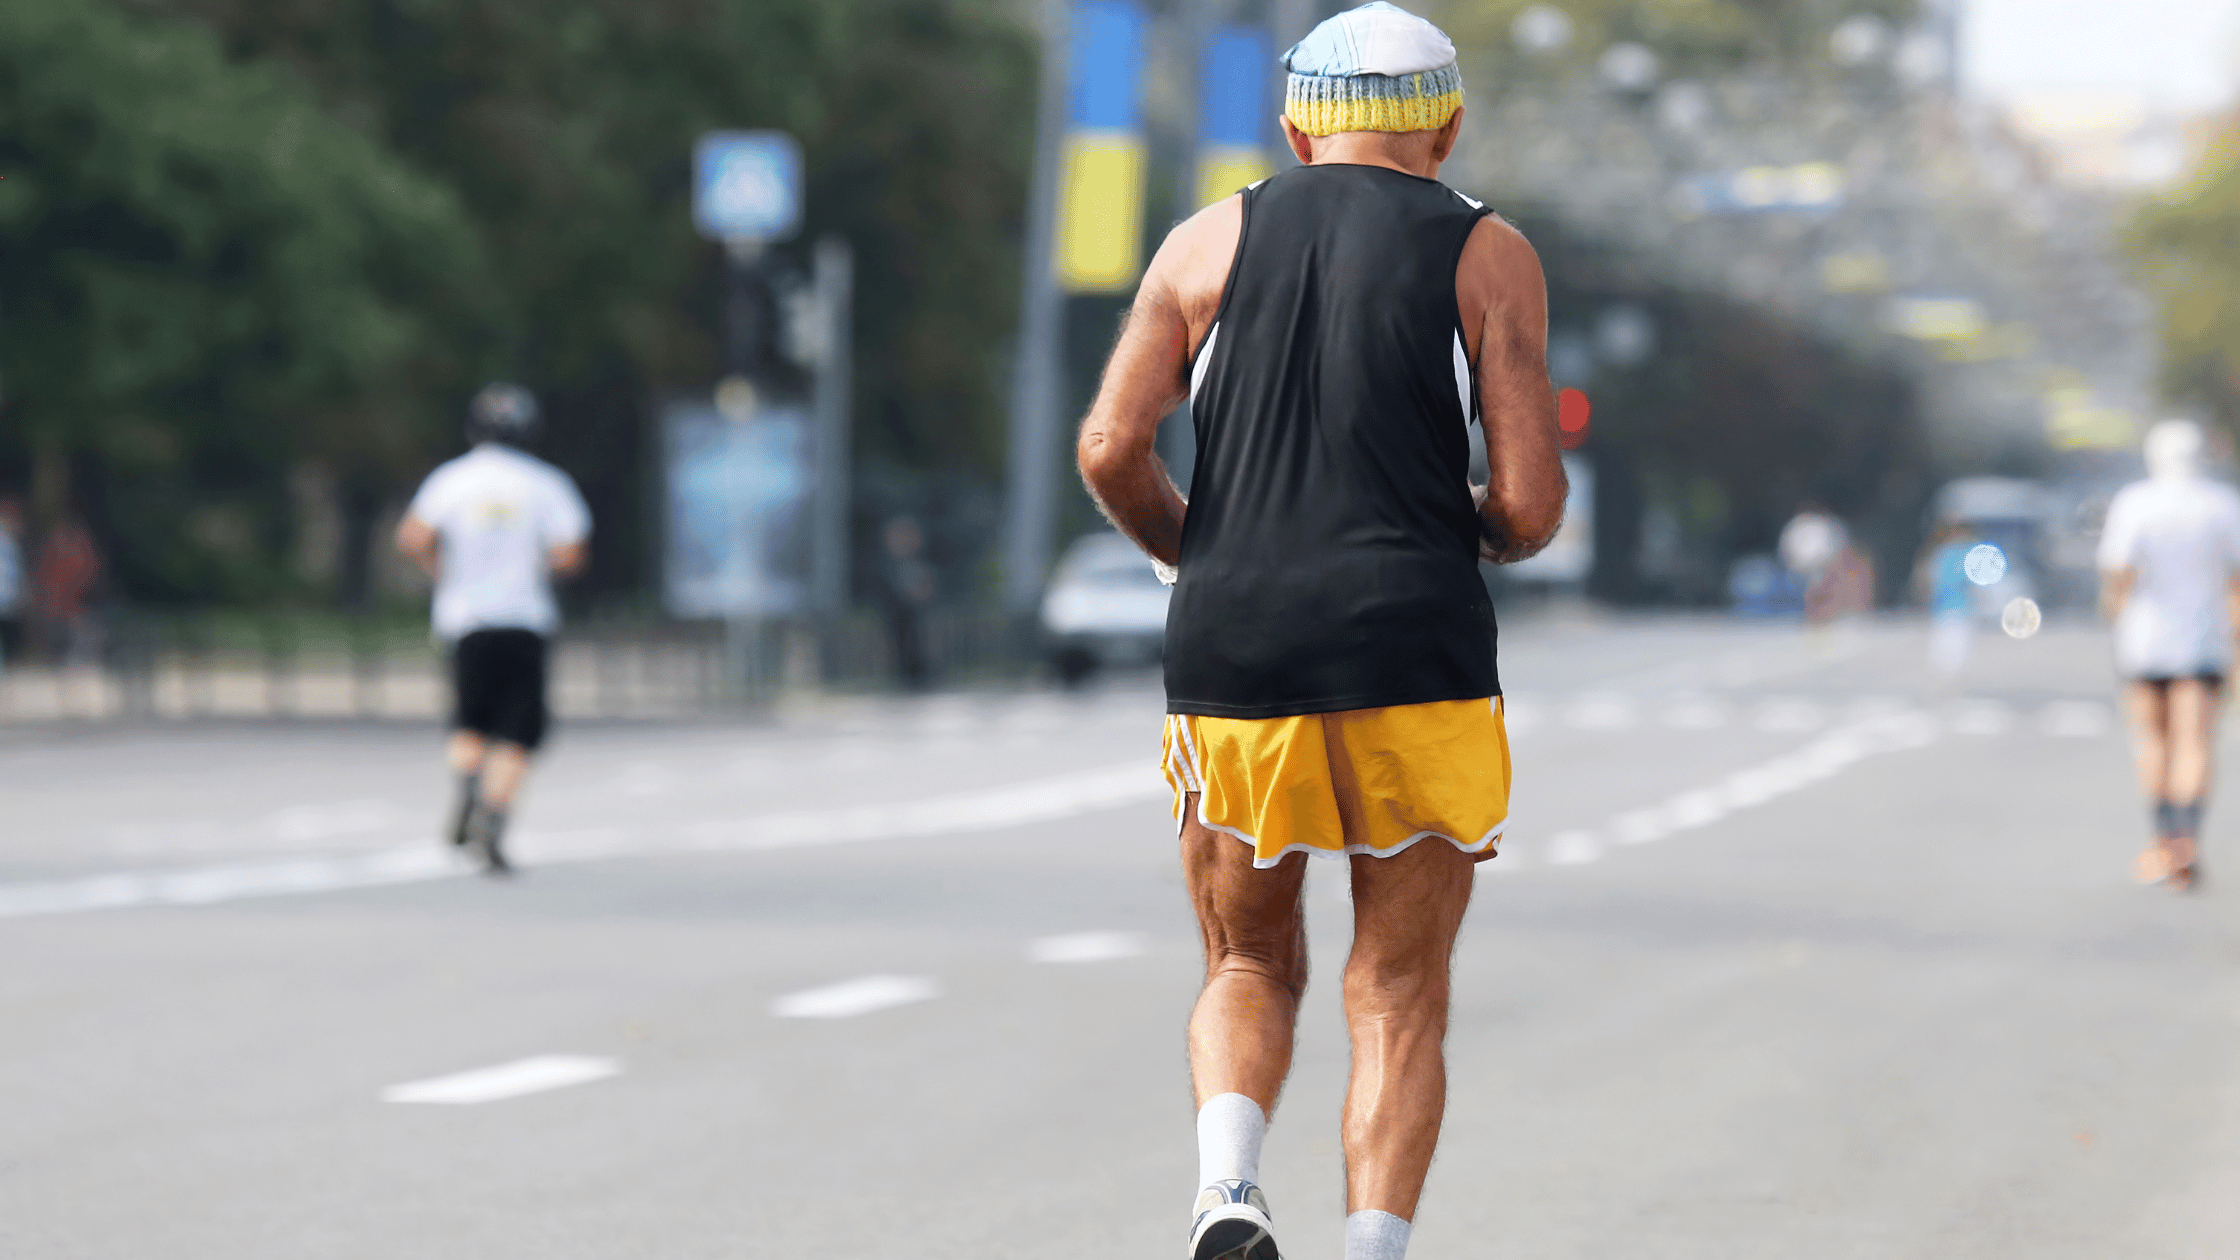 How Long Does It Take To Train For a Half Marathon Your Age